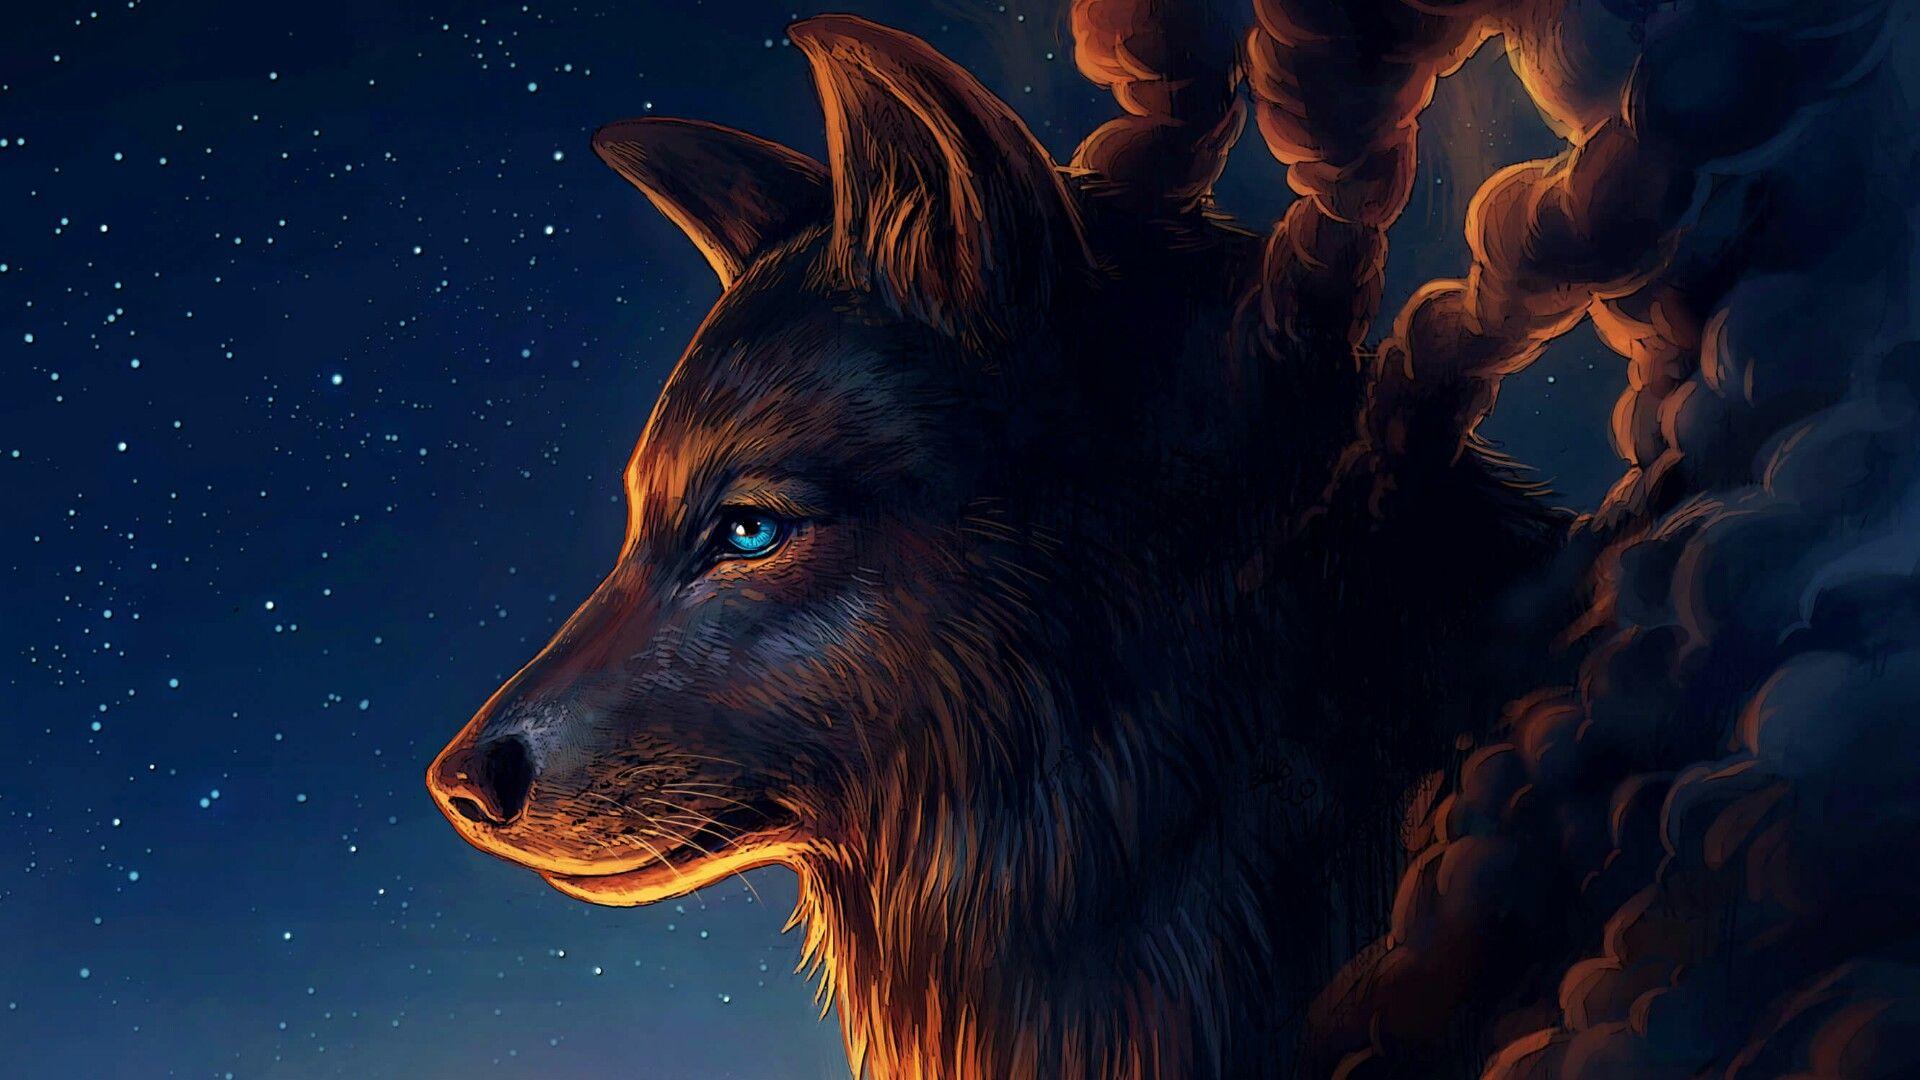 Artistic animation of a wolf Wallpaper 4k Ultra HD ID:3822